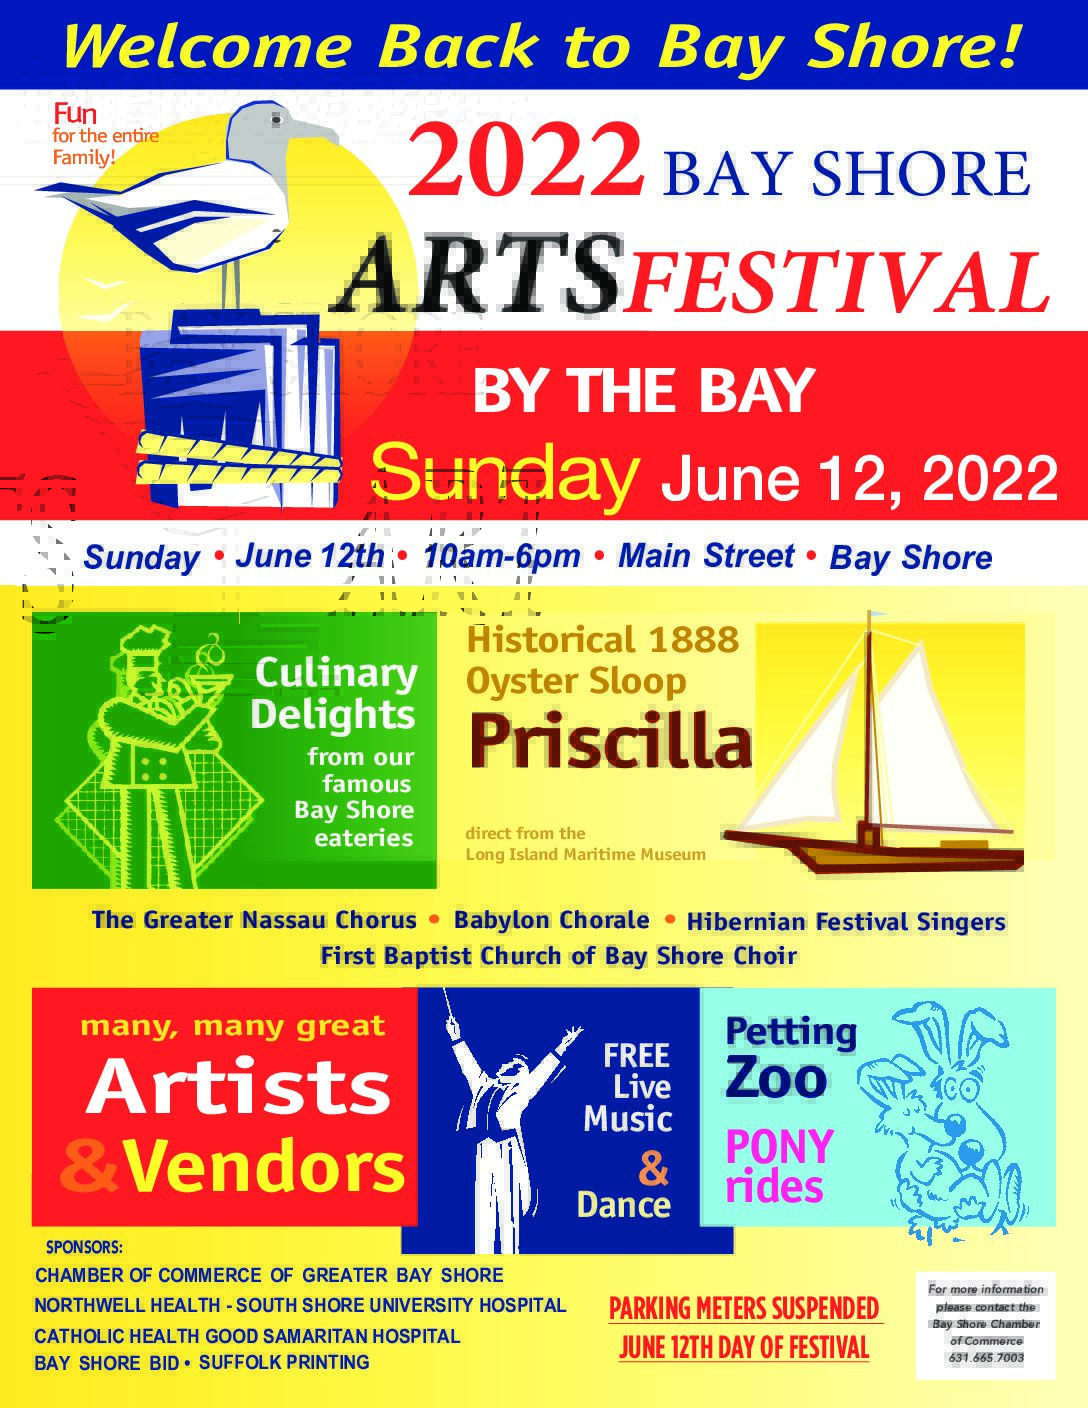 Welcome Back To Bay Shore: 2022 Festival This Sunday!